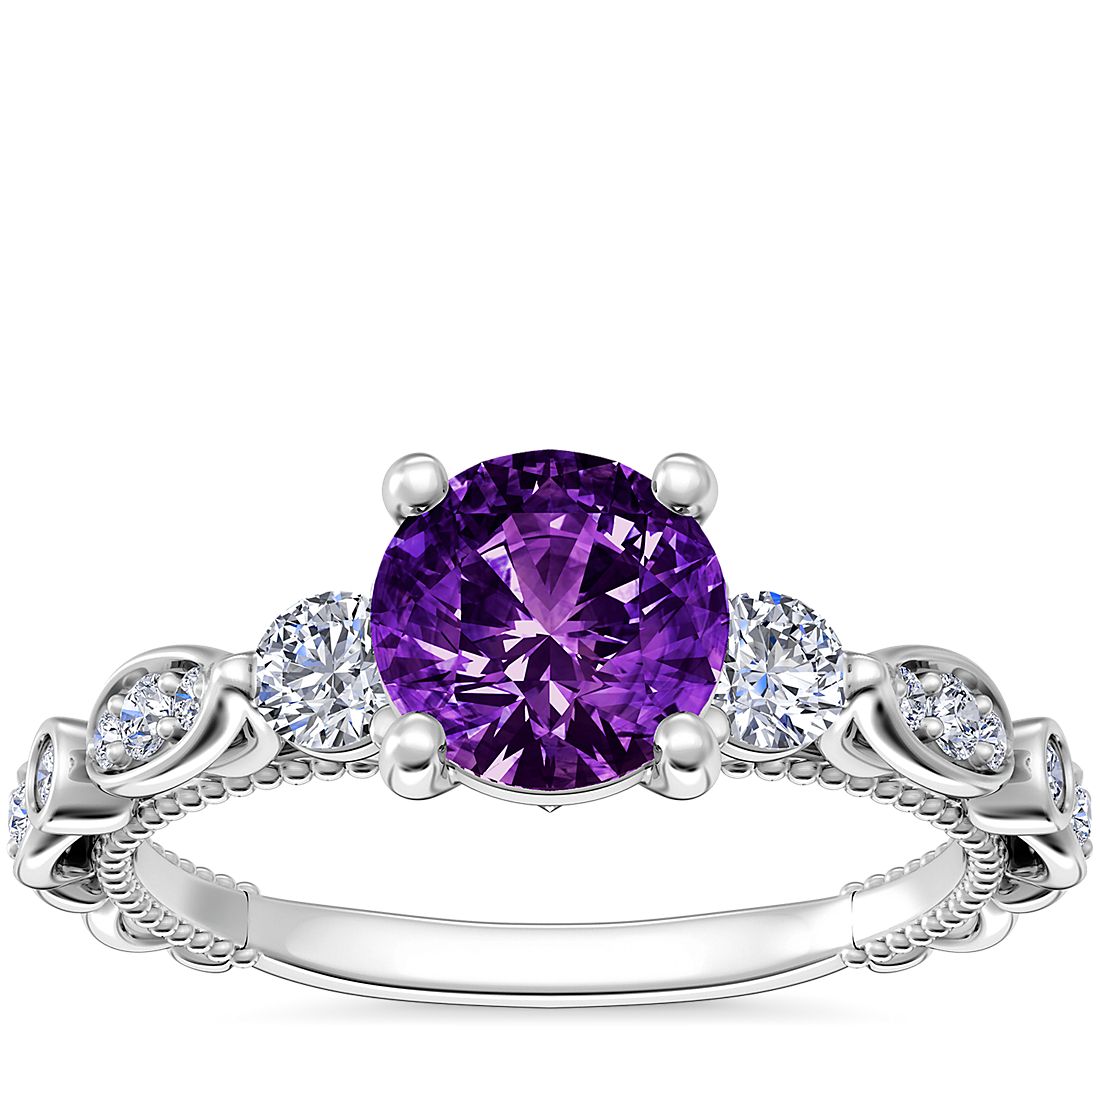 Floral Ellipse Diamond Cathedral Engagement Ring with Round Amethyst in Platinum (6.5mm)